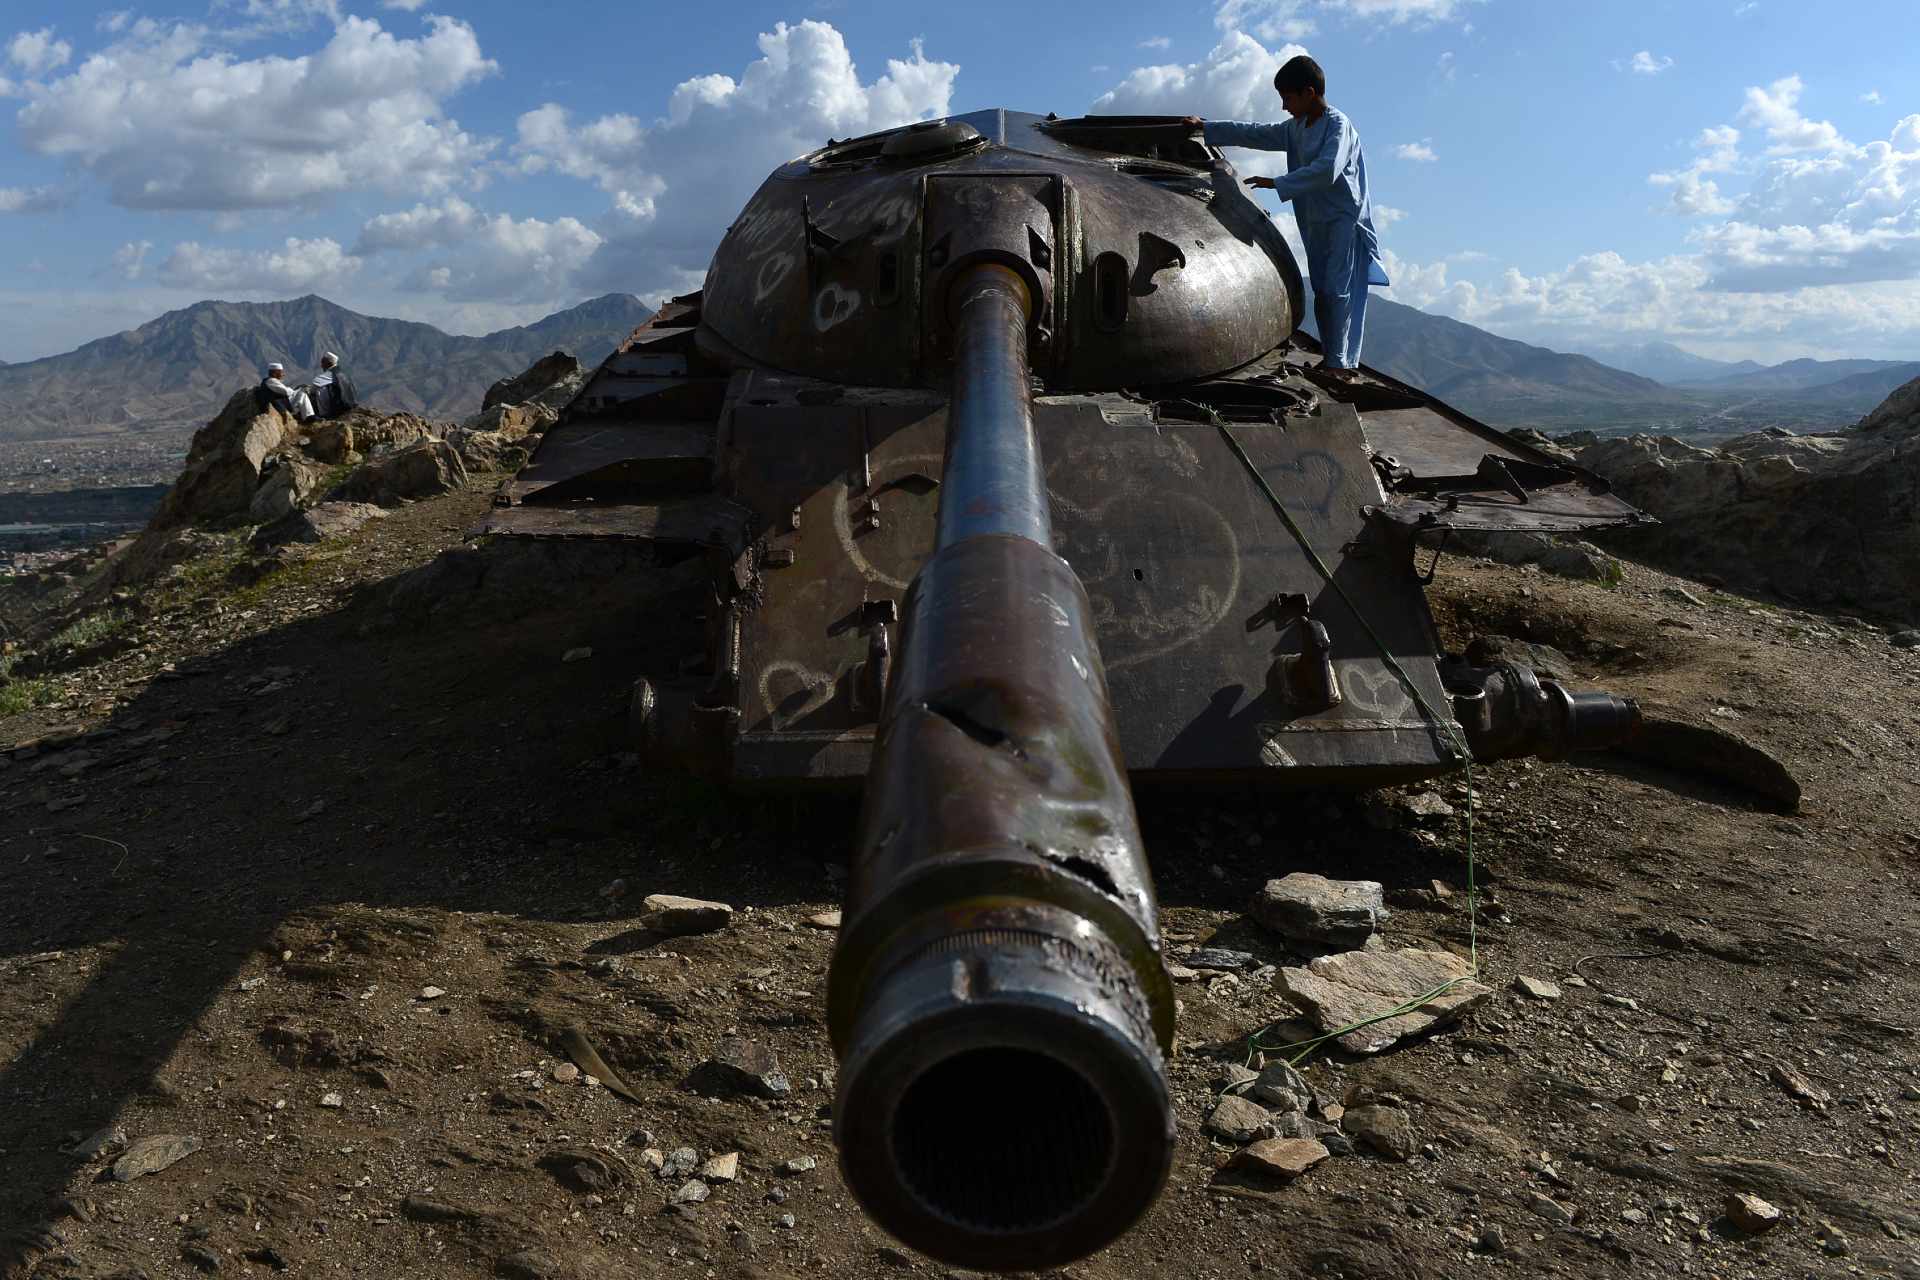 Afghan youths climb on the wreck of a Soviet tank in Afghanistan in 2014 (AFP)